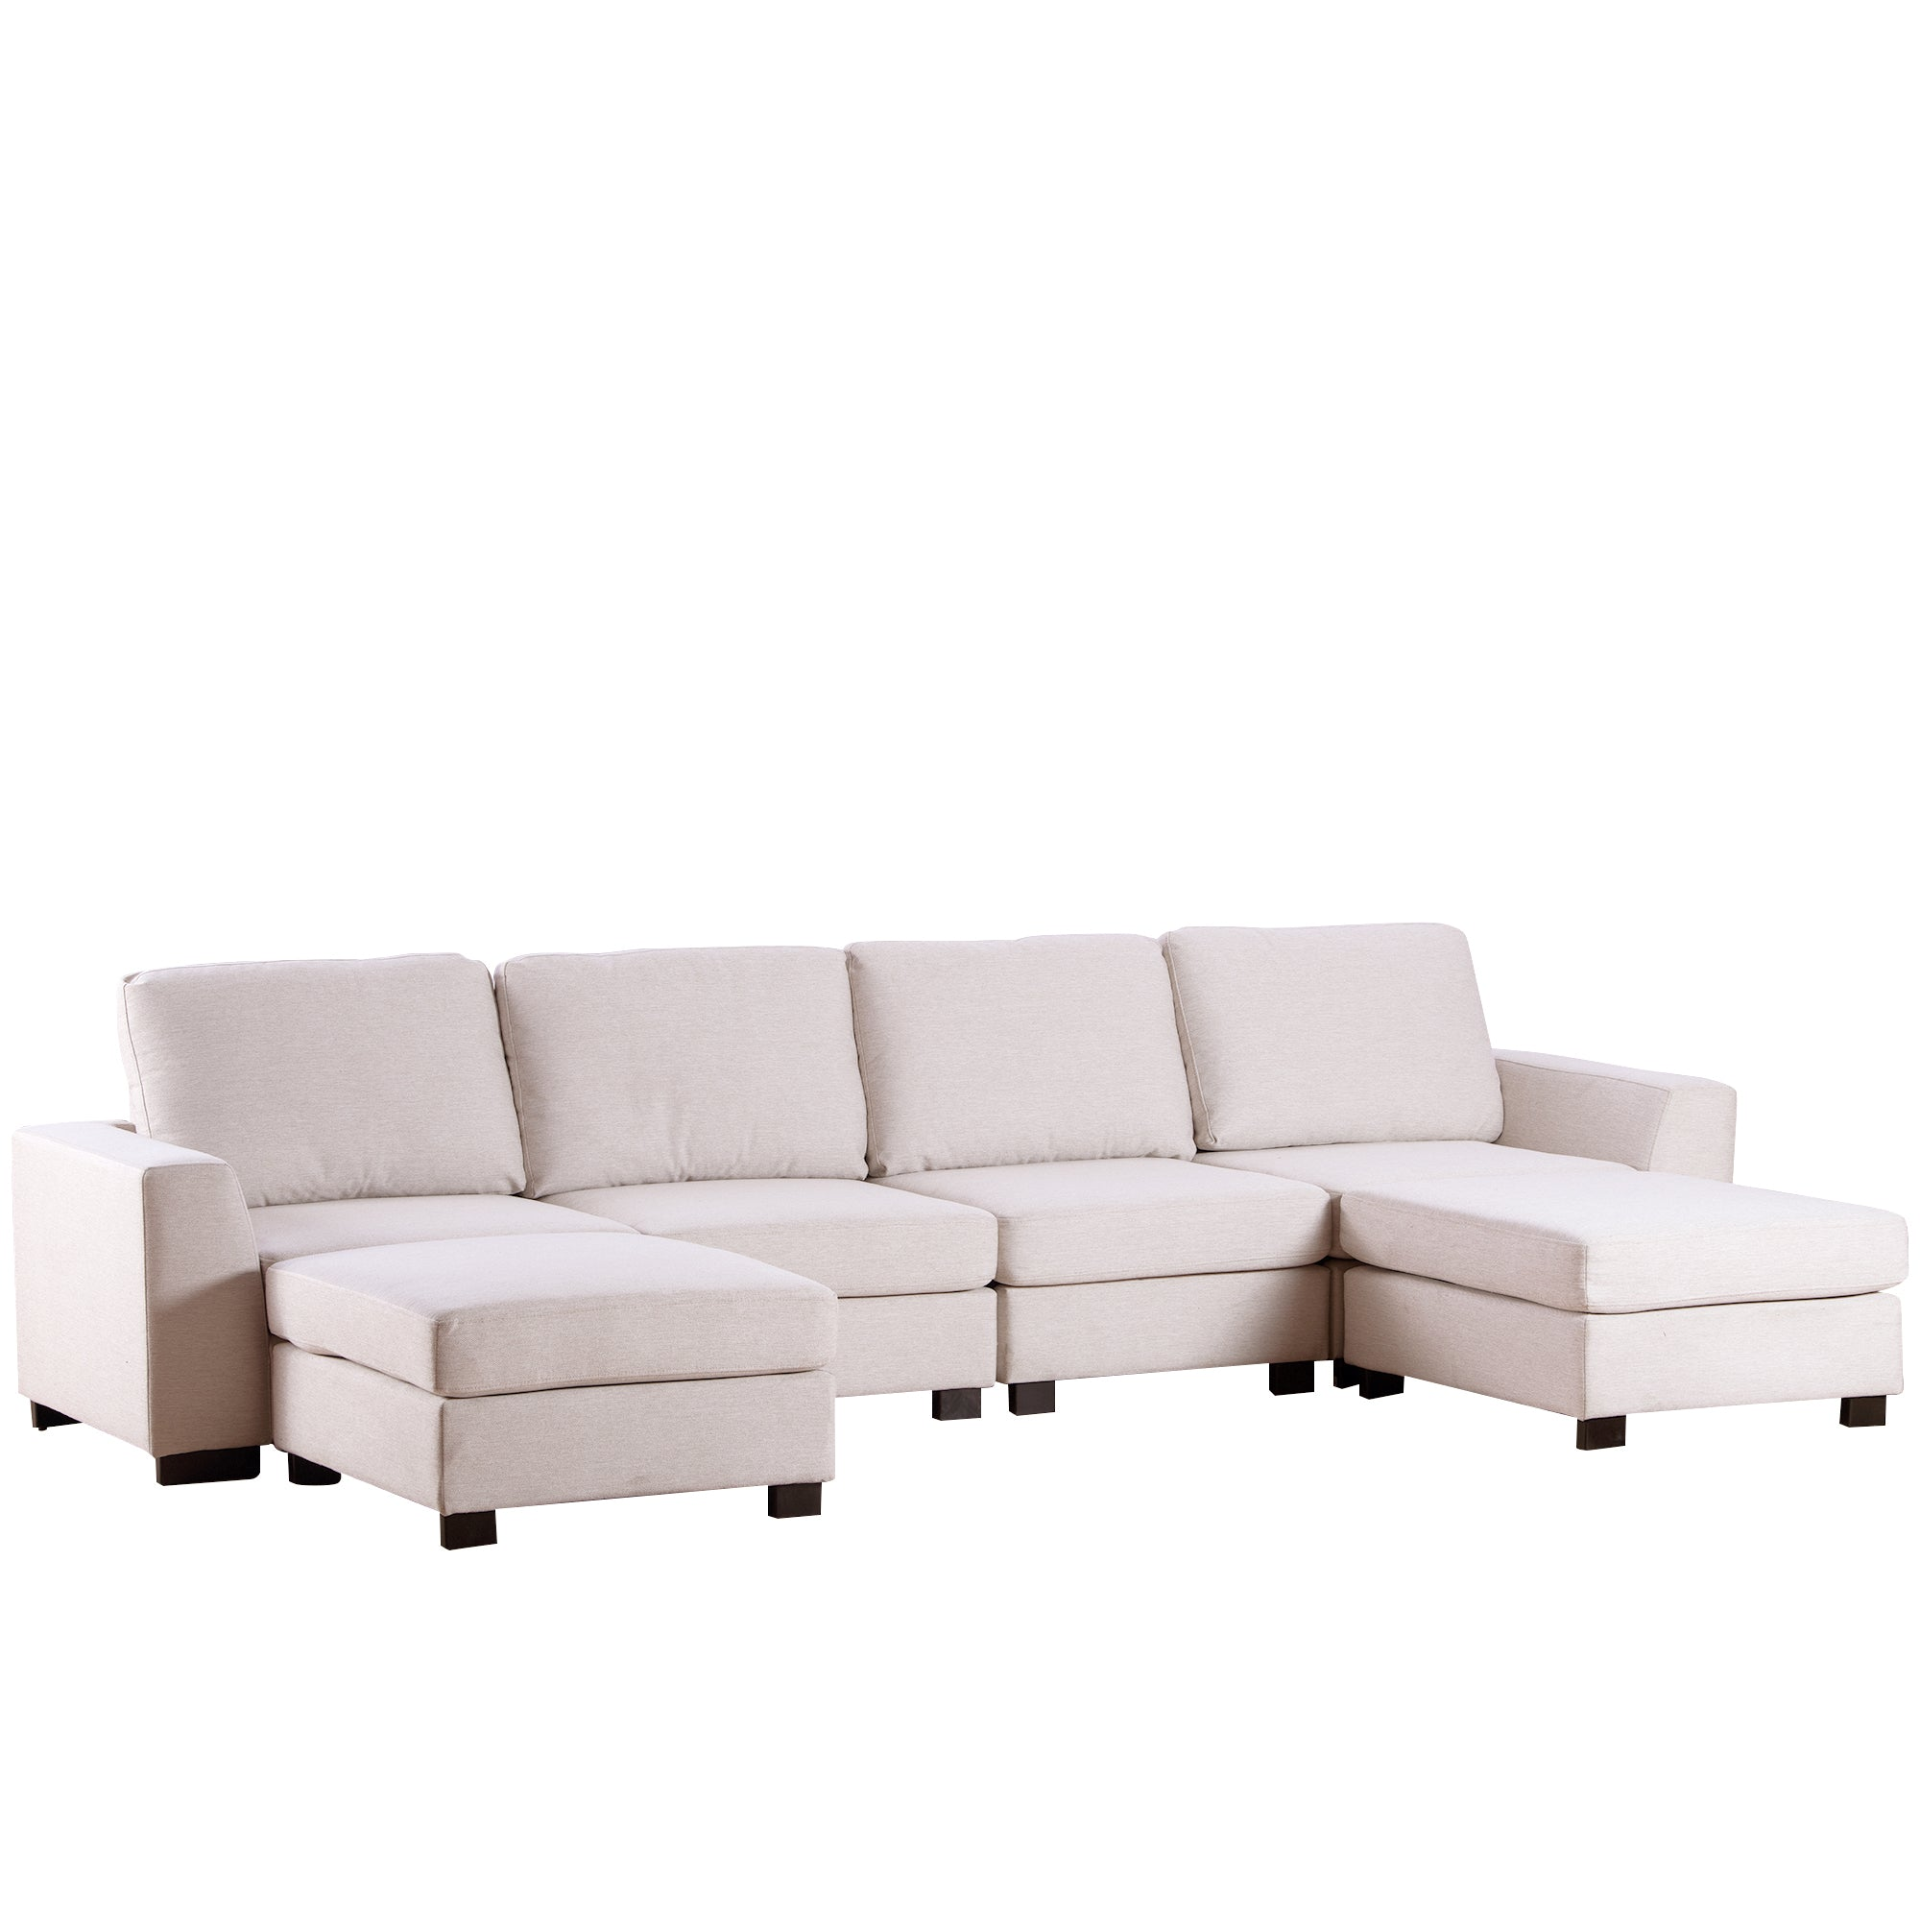 3 Pieces U shaped Sofa with Removable Ottomans - 33943177_large_c7683006-71ea-4039-88a8-0f568b1c8a82